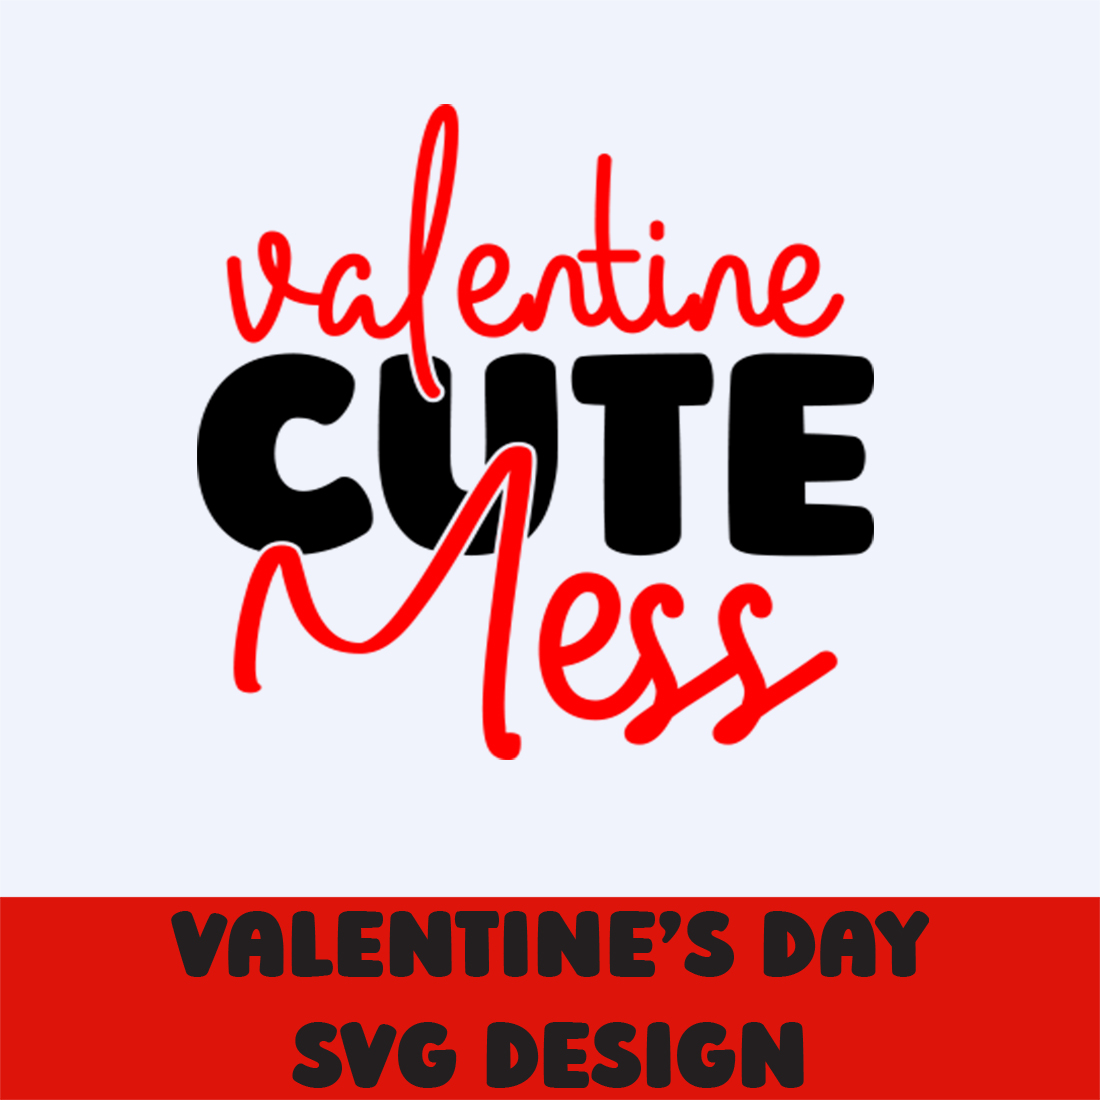 Image with exquisite Valentine Cute Mess lettering